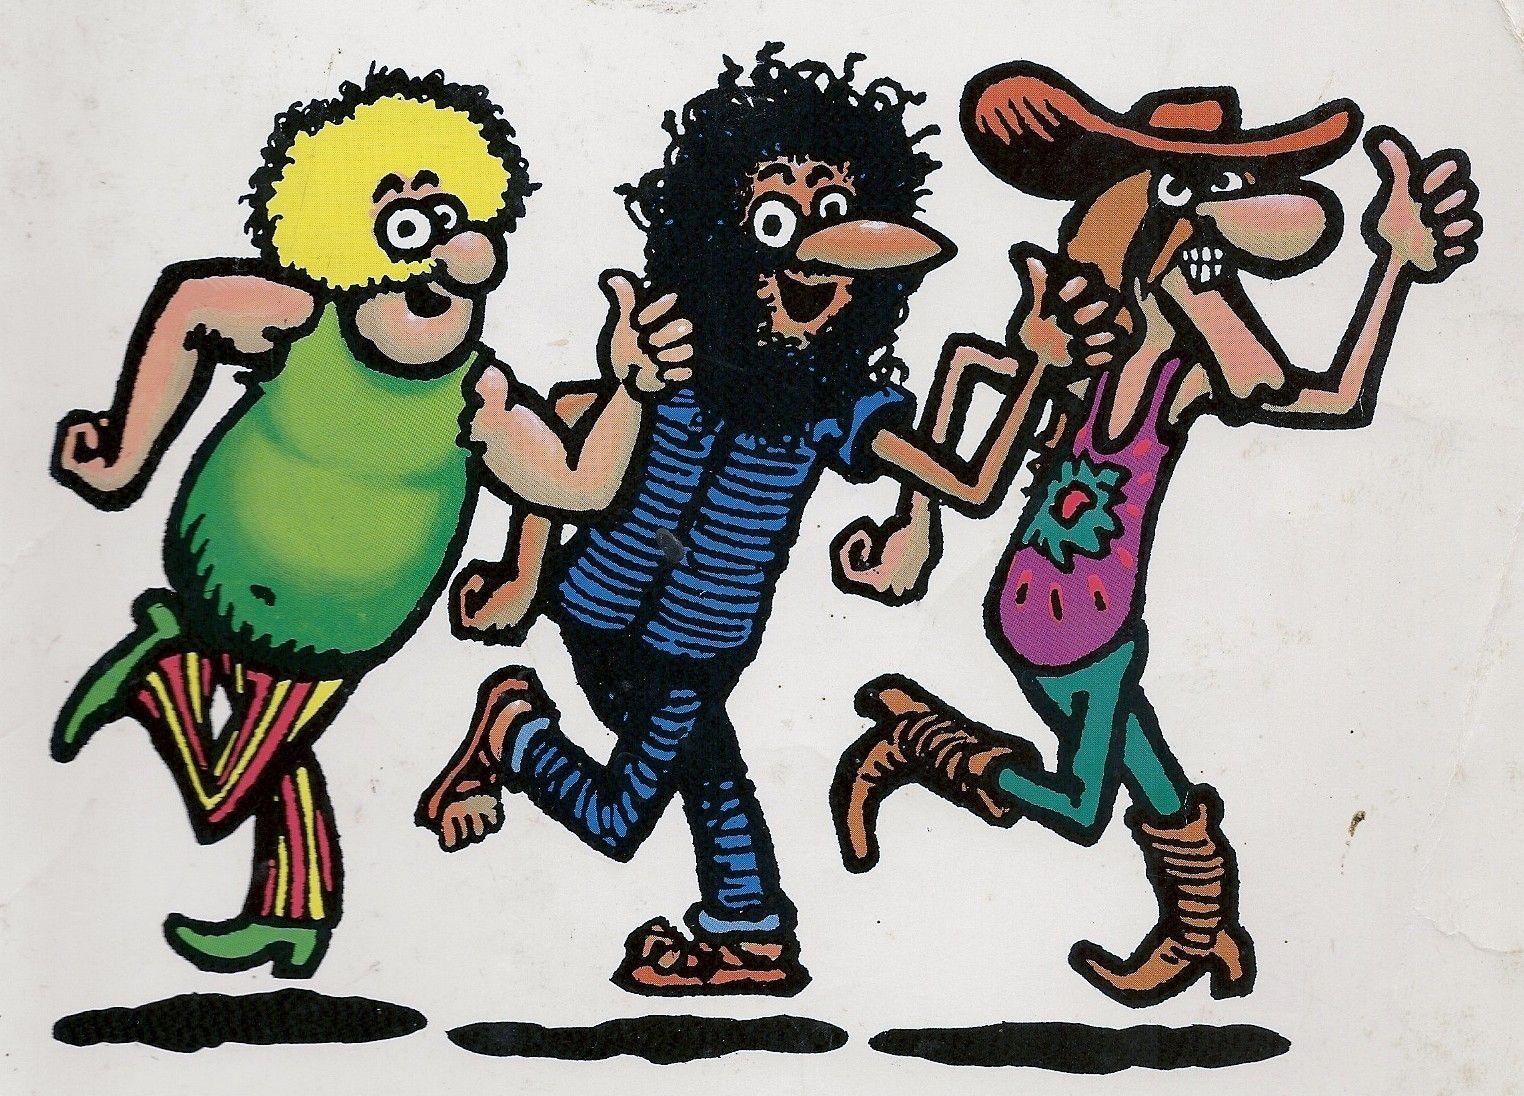 The Fabulous Furry Freak Brothers.